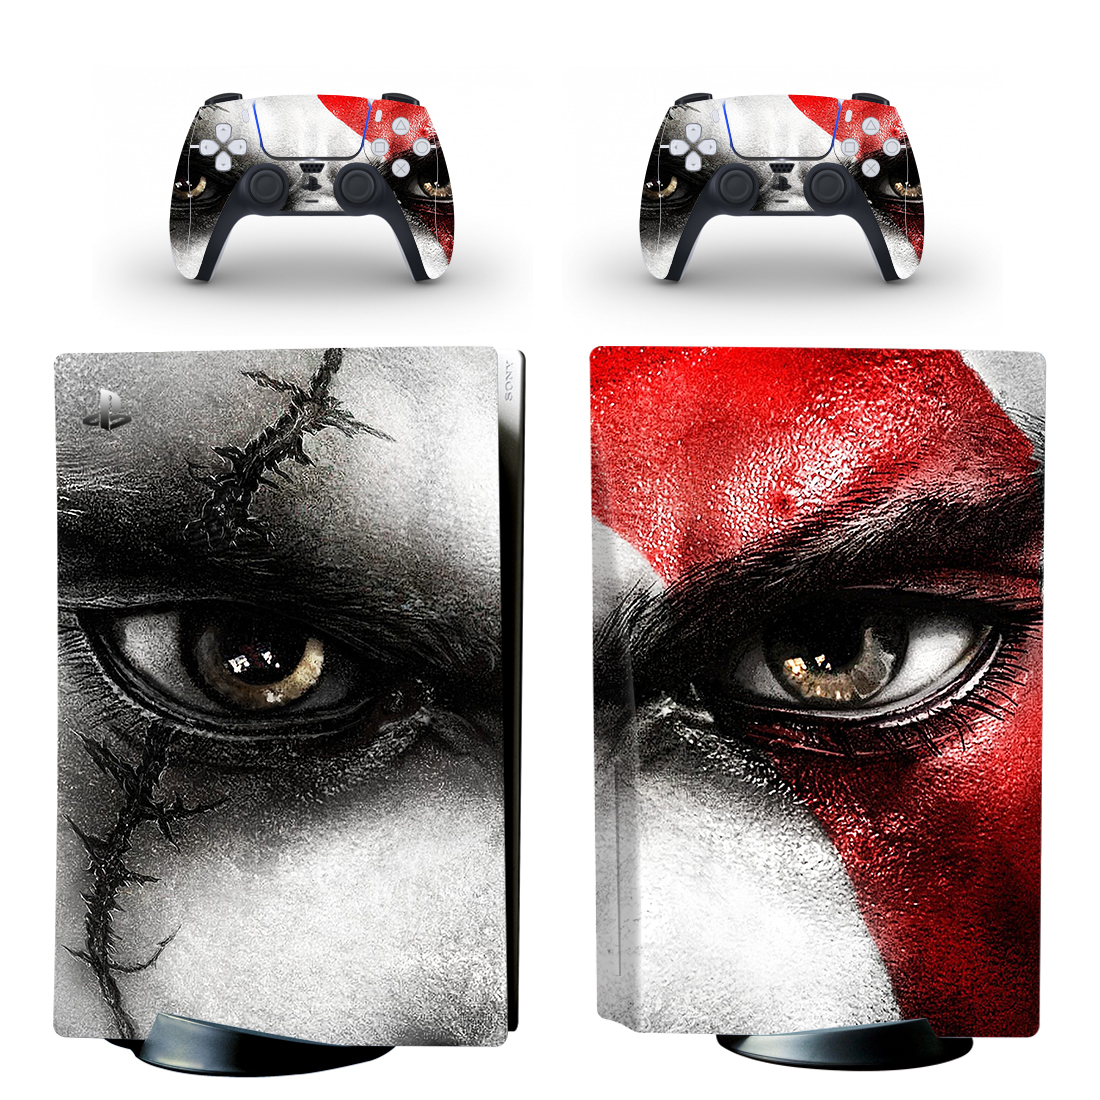 God Of War III PS5 Skin Sticker And Controllers Design 1